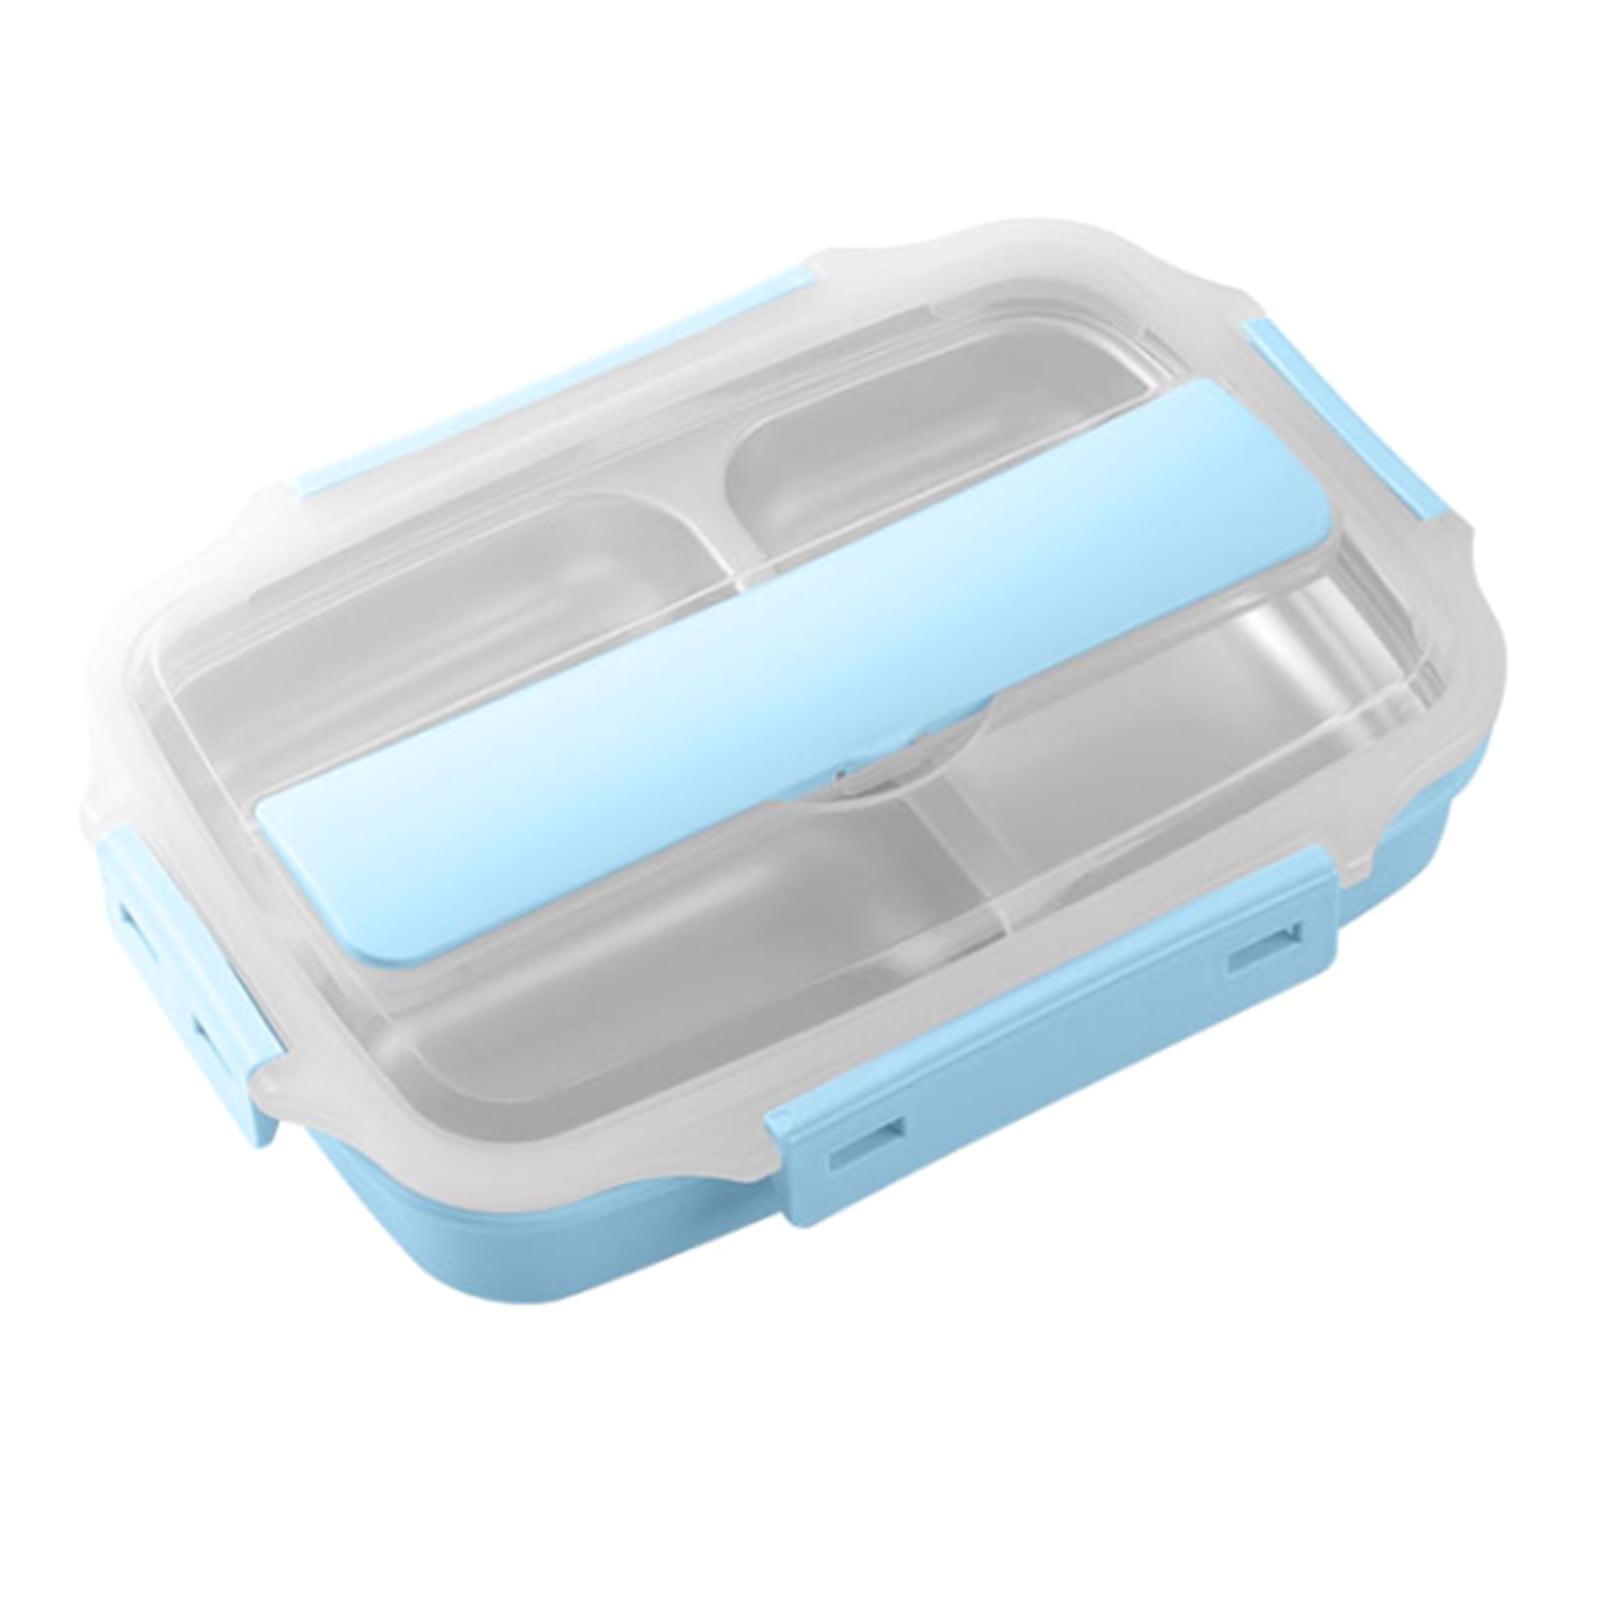 AU-Microwave Heating Lunch Box Leak-Proof Picnic Divided Storage Bento Container